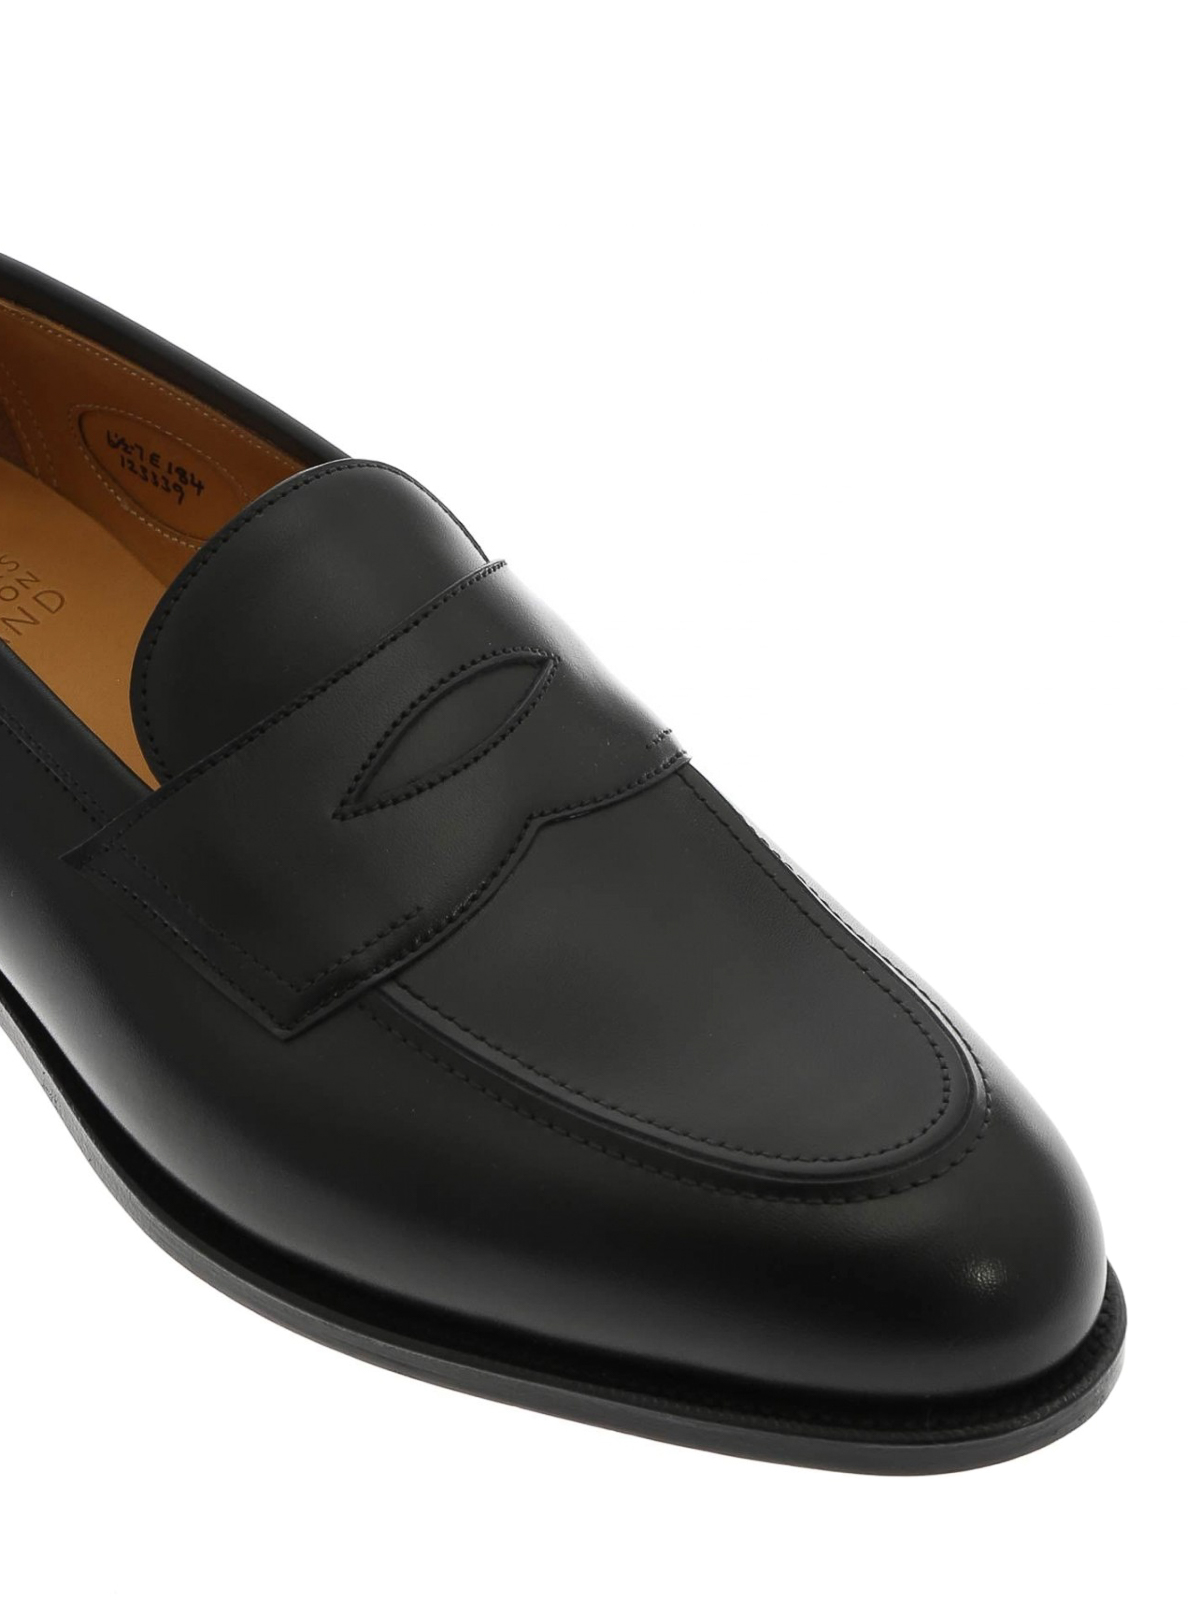 Loafers & Slippers Edward Green - Piccadilly loafers - PICCADILLY184EBLACK